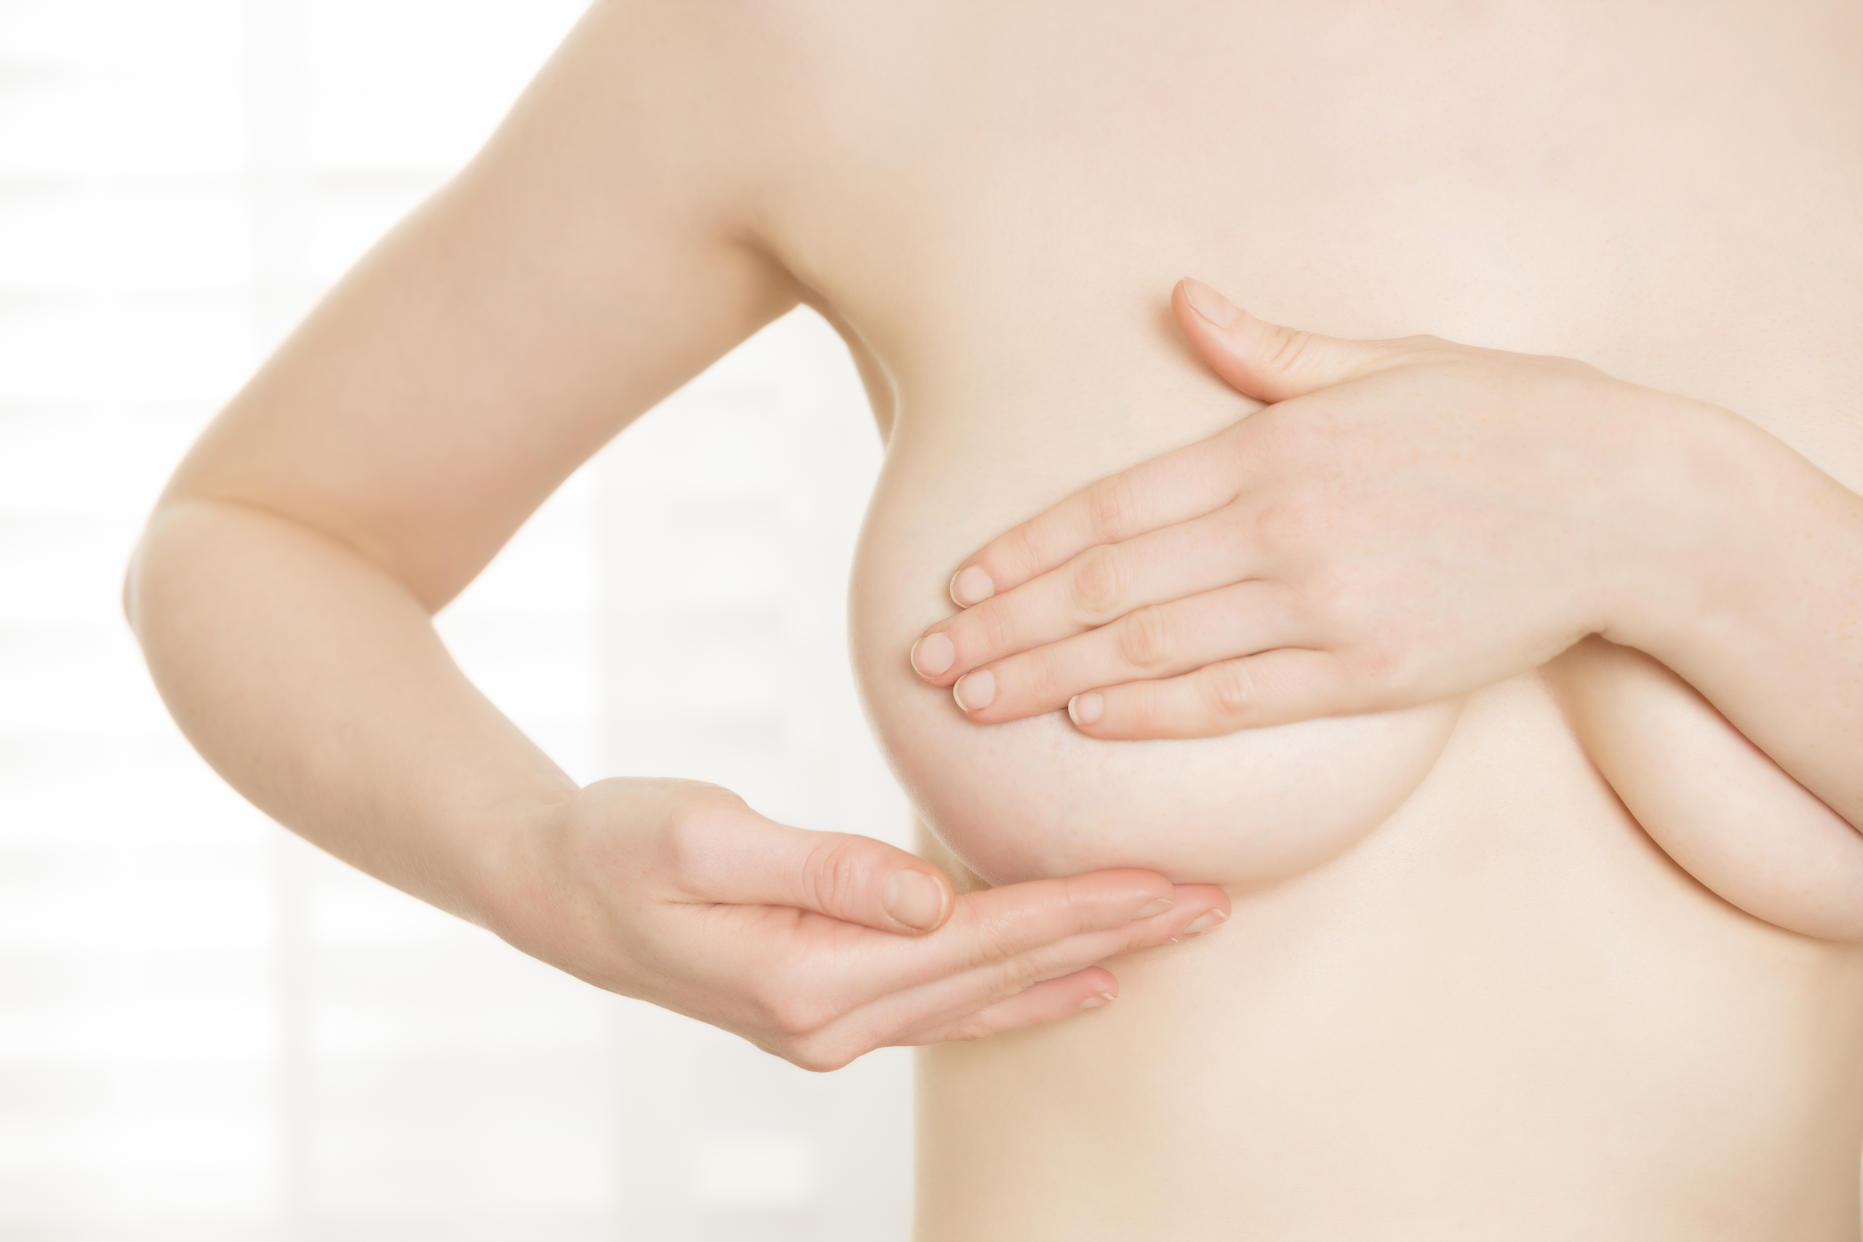 How to check your breasts for signs of cancer - Yahoo Sports